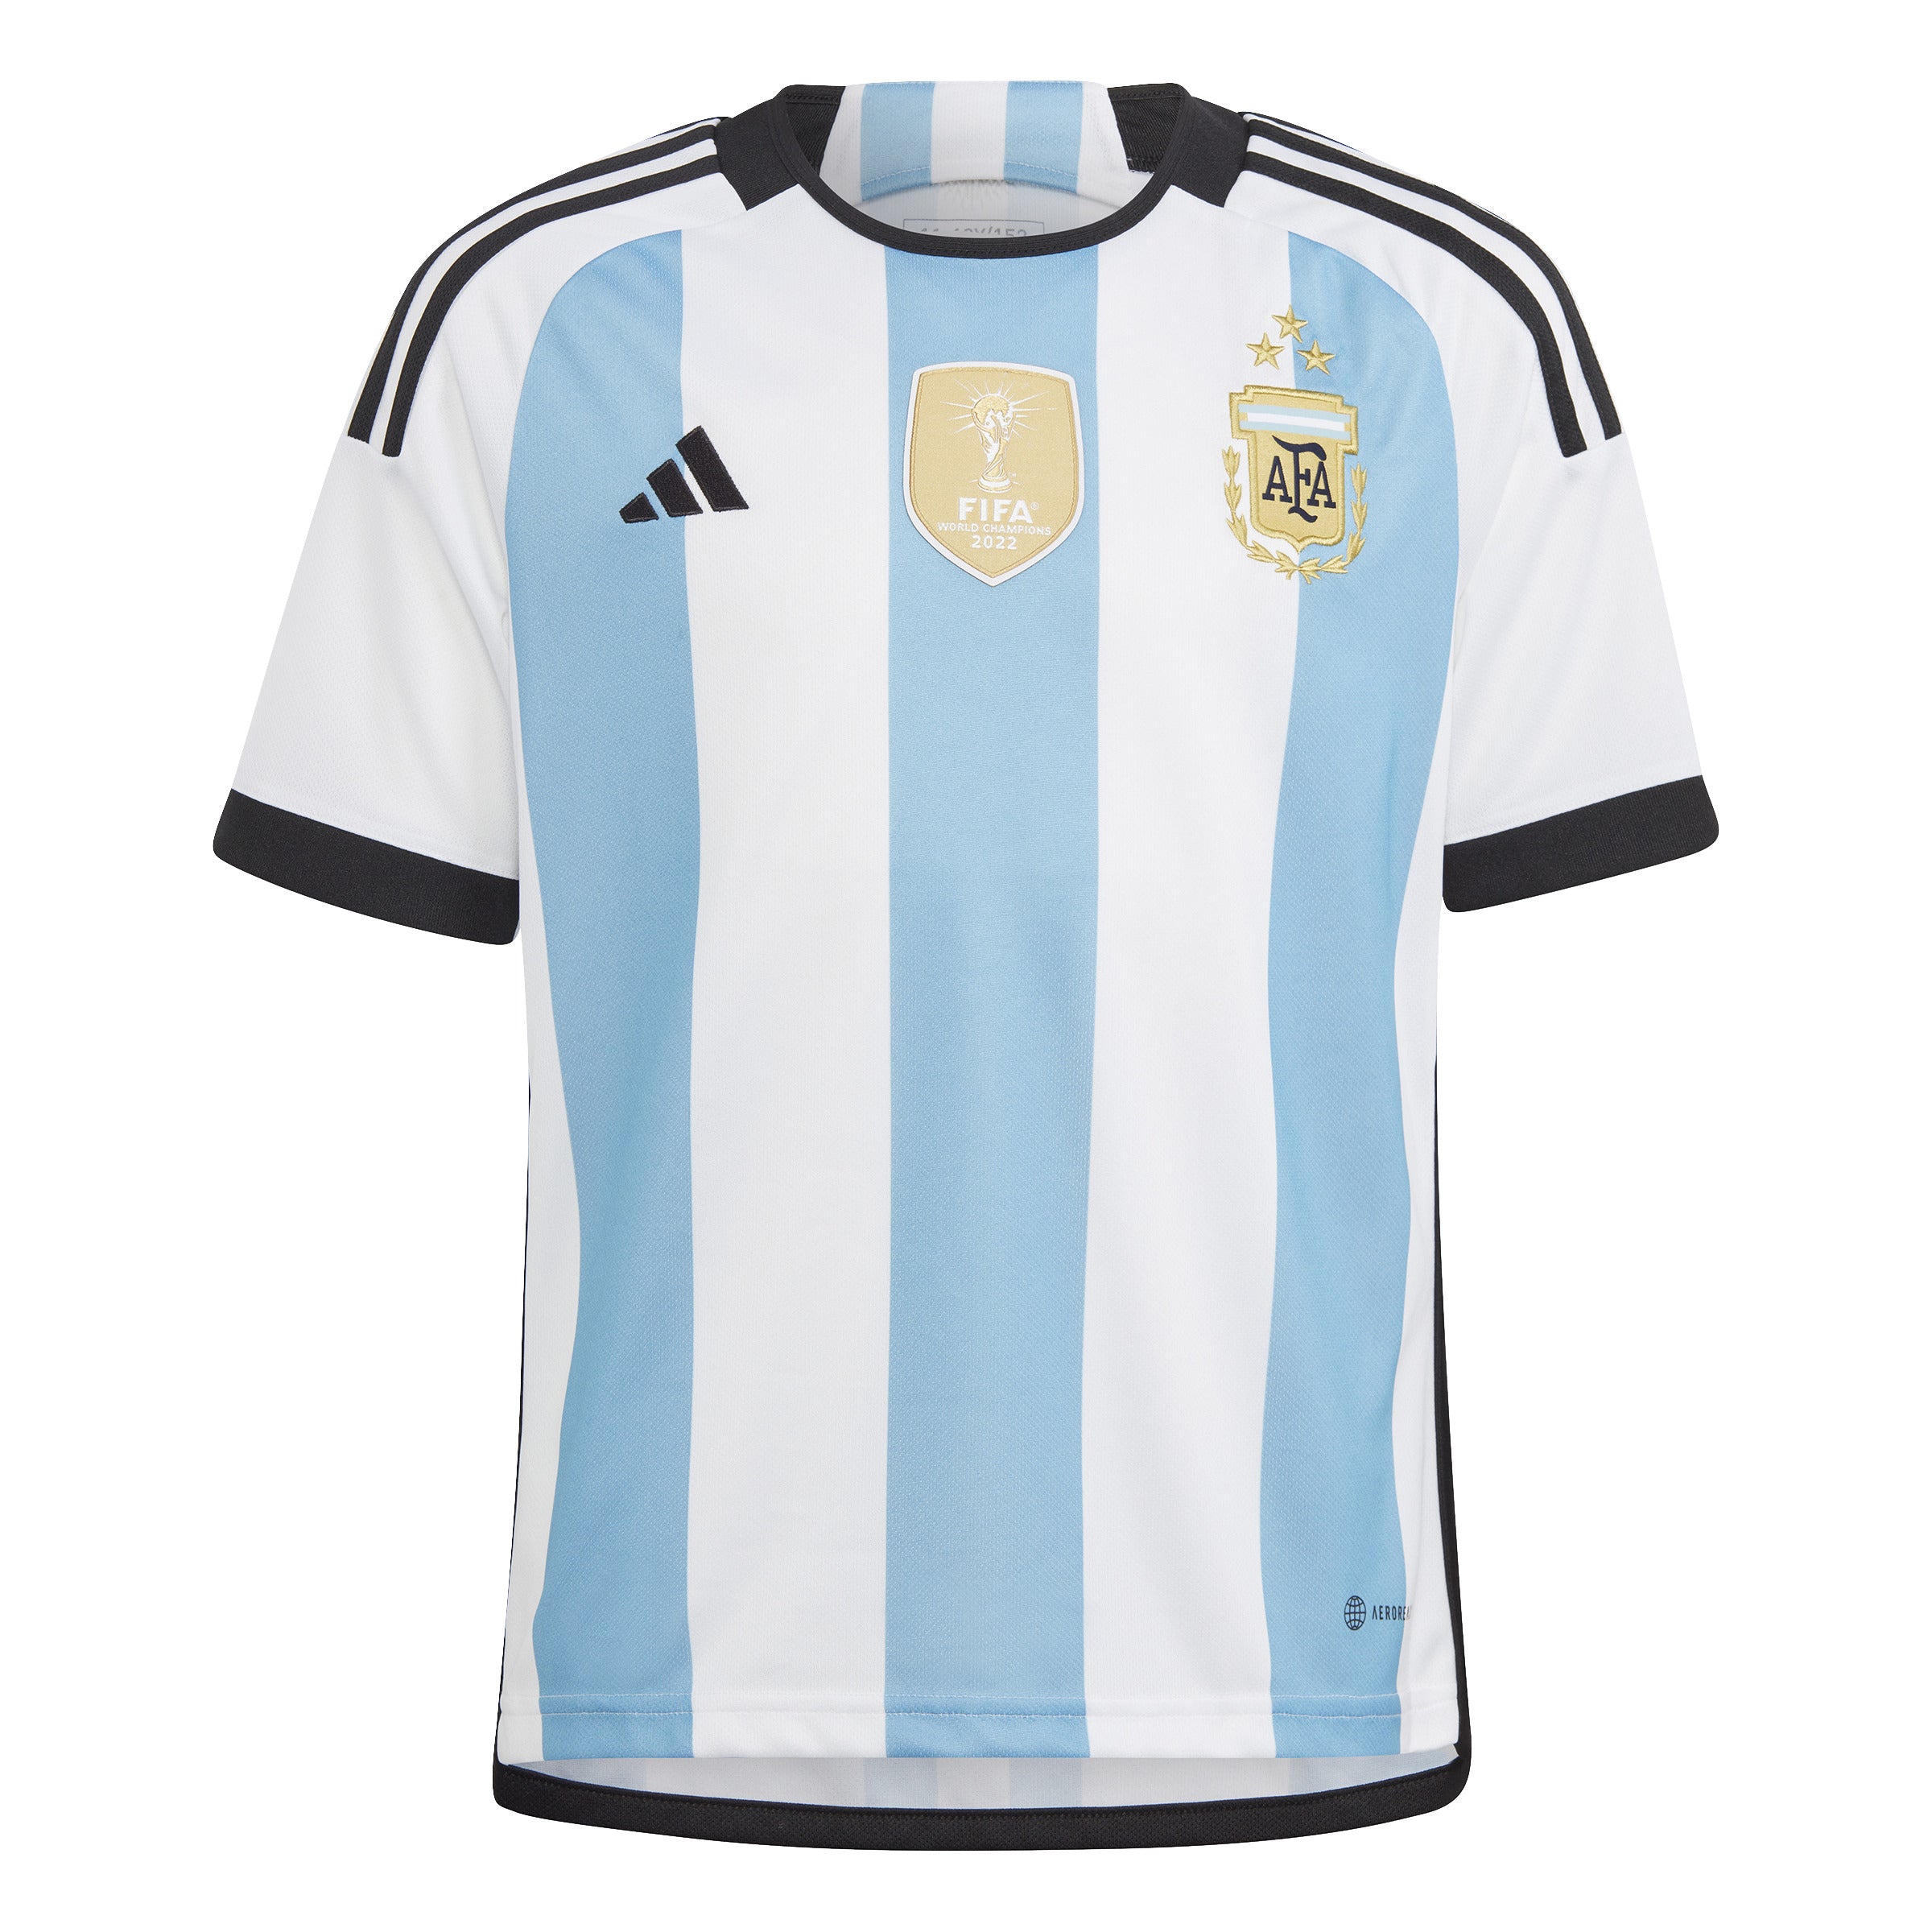 Adidas Argentina Fifa World Cup 2022 Youth Home Replica Jersey - IB3595